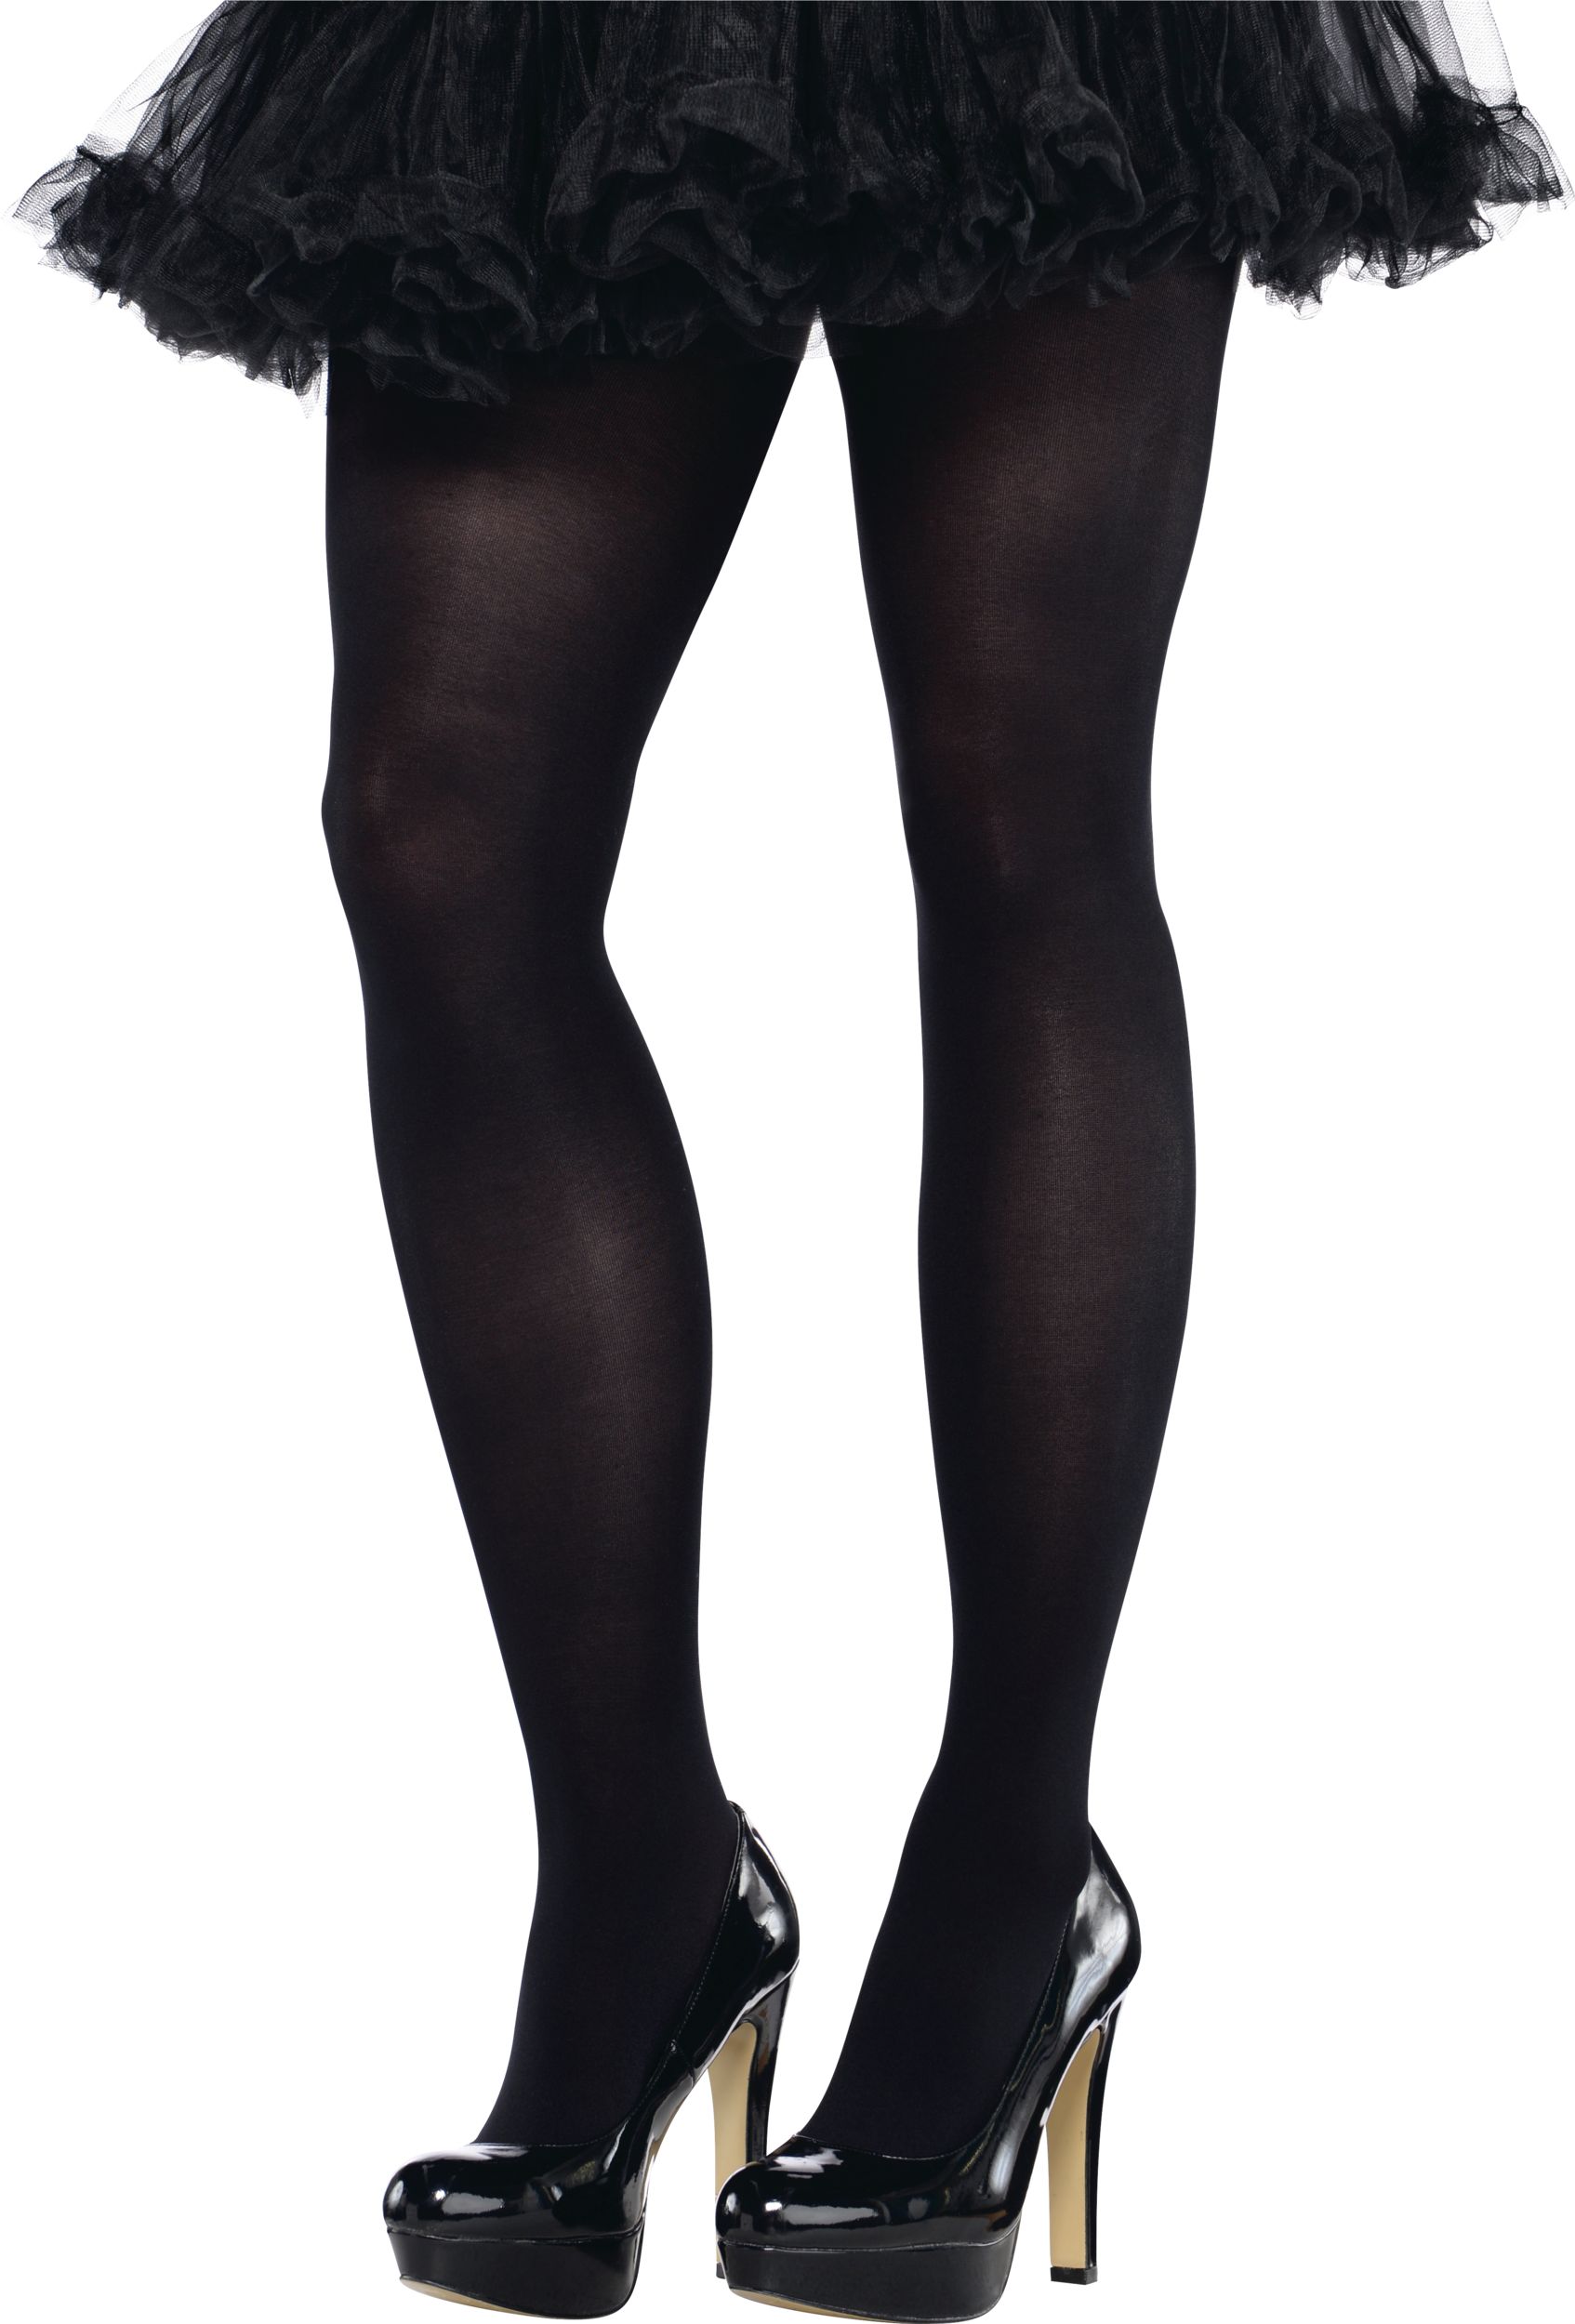 Seamless Party Tights, Comfortable Leggings for Halloween, Adult, Assorted  Colours, Plus Size